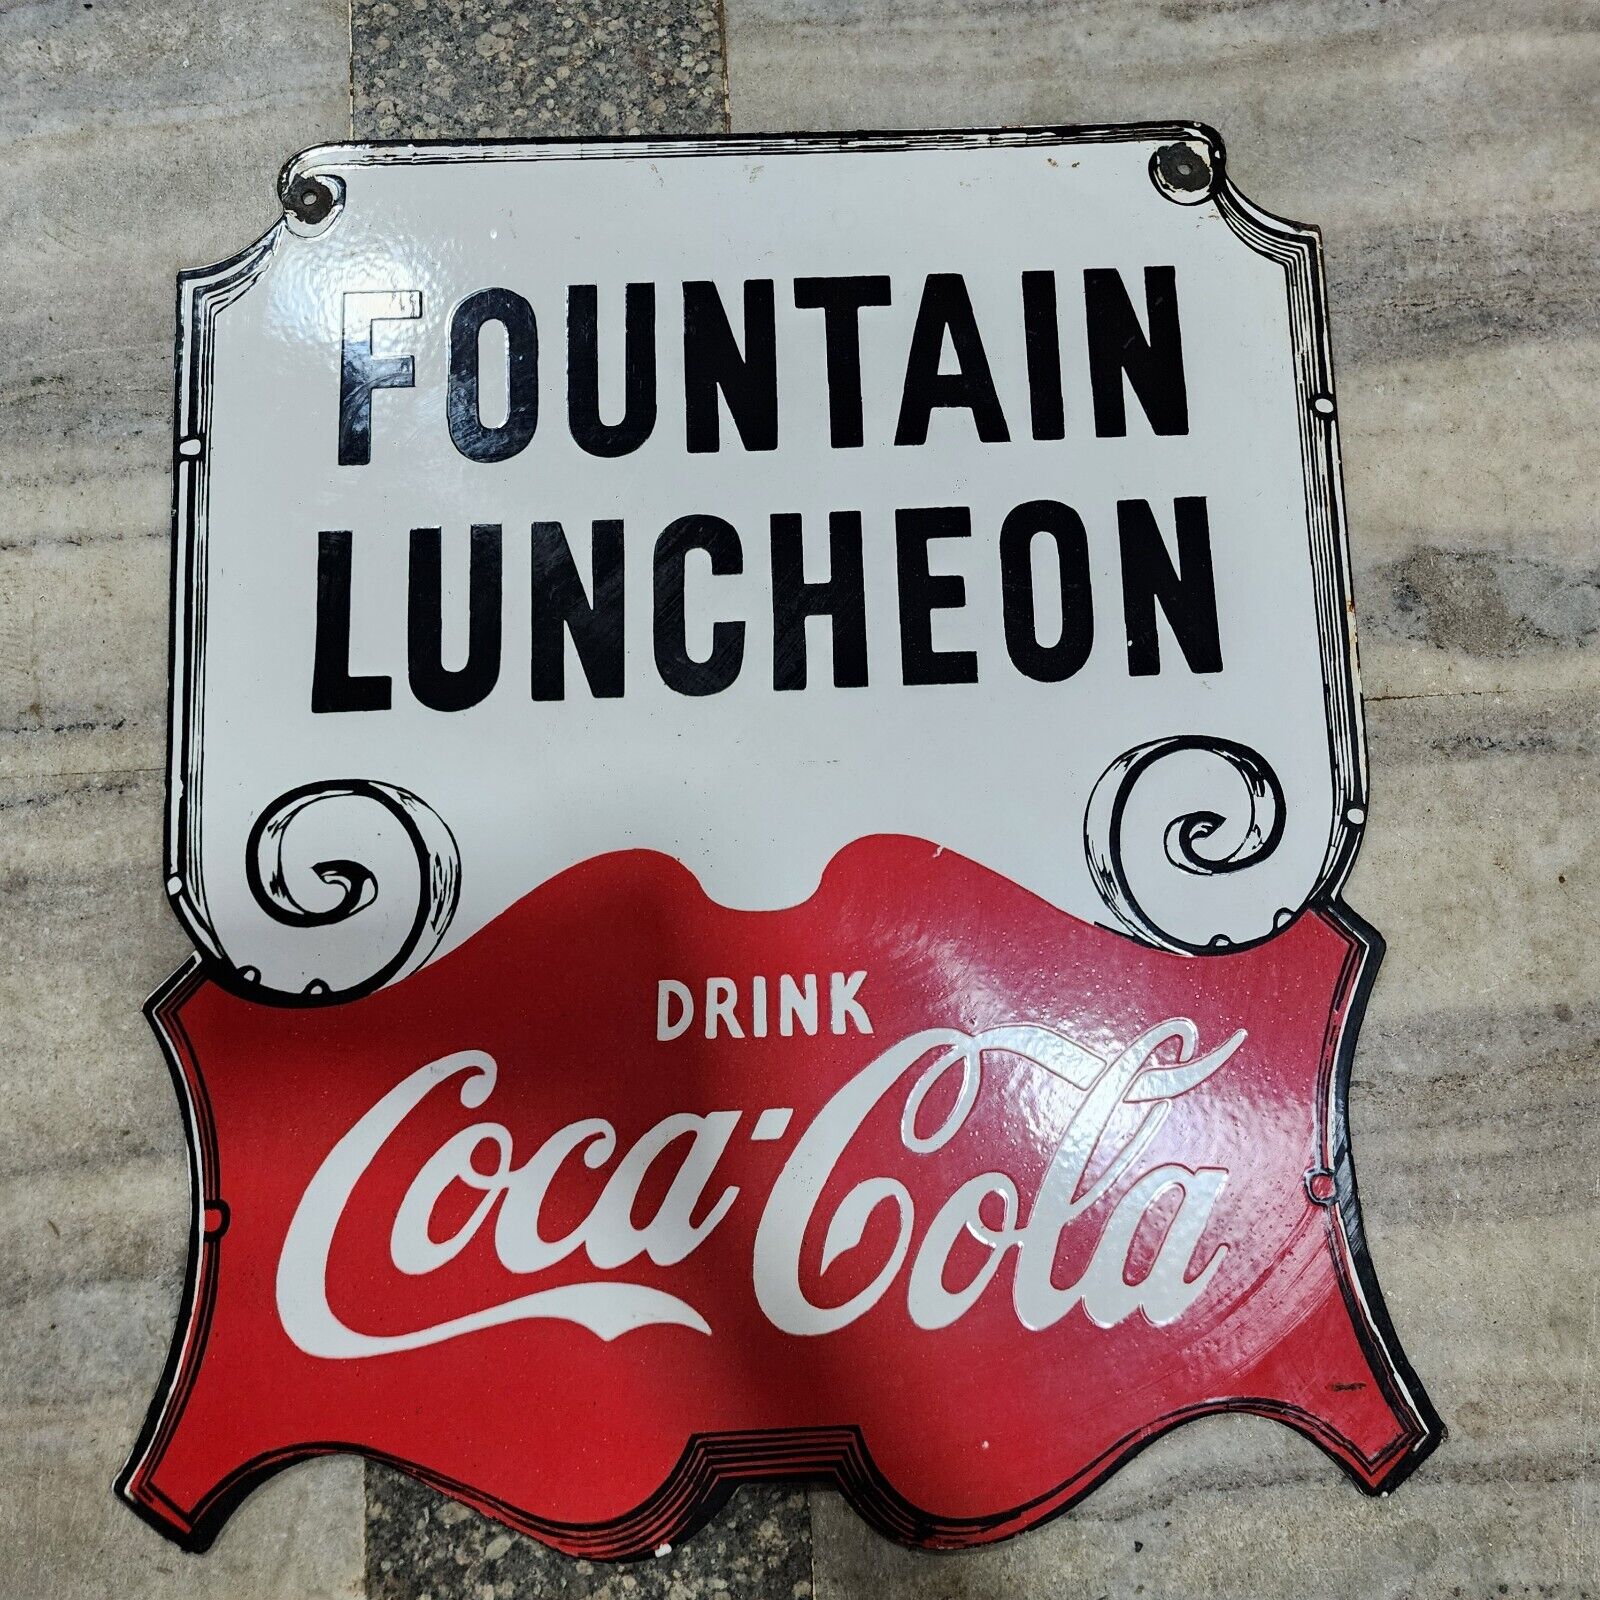 COCA-COLA FOUNTAIN LUNCHEON PORCELAIN ENAMEL SIGN 21 1/2 X 26 1/2 INCHES